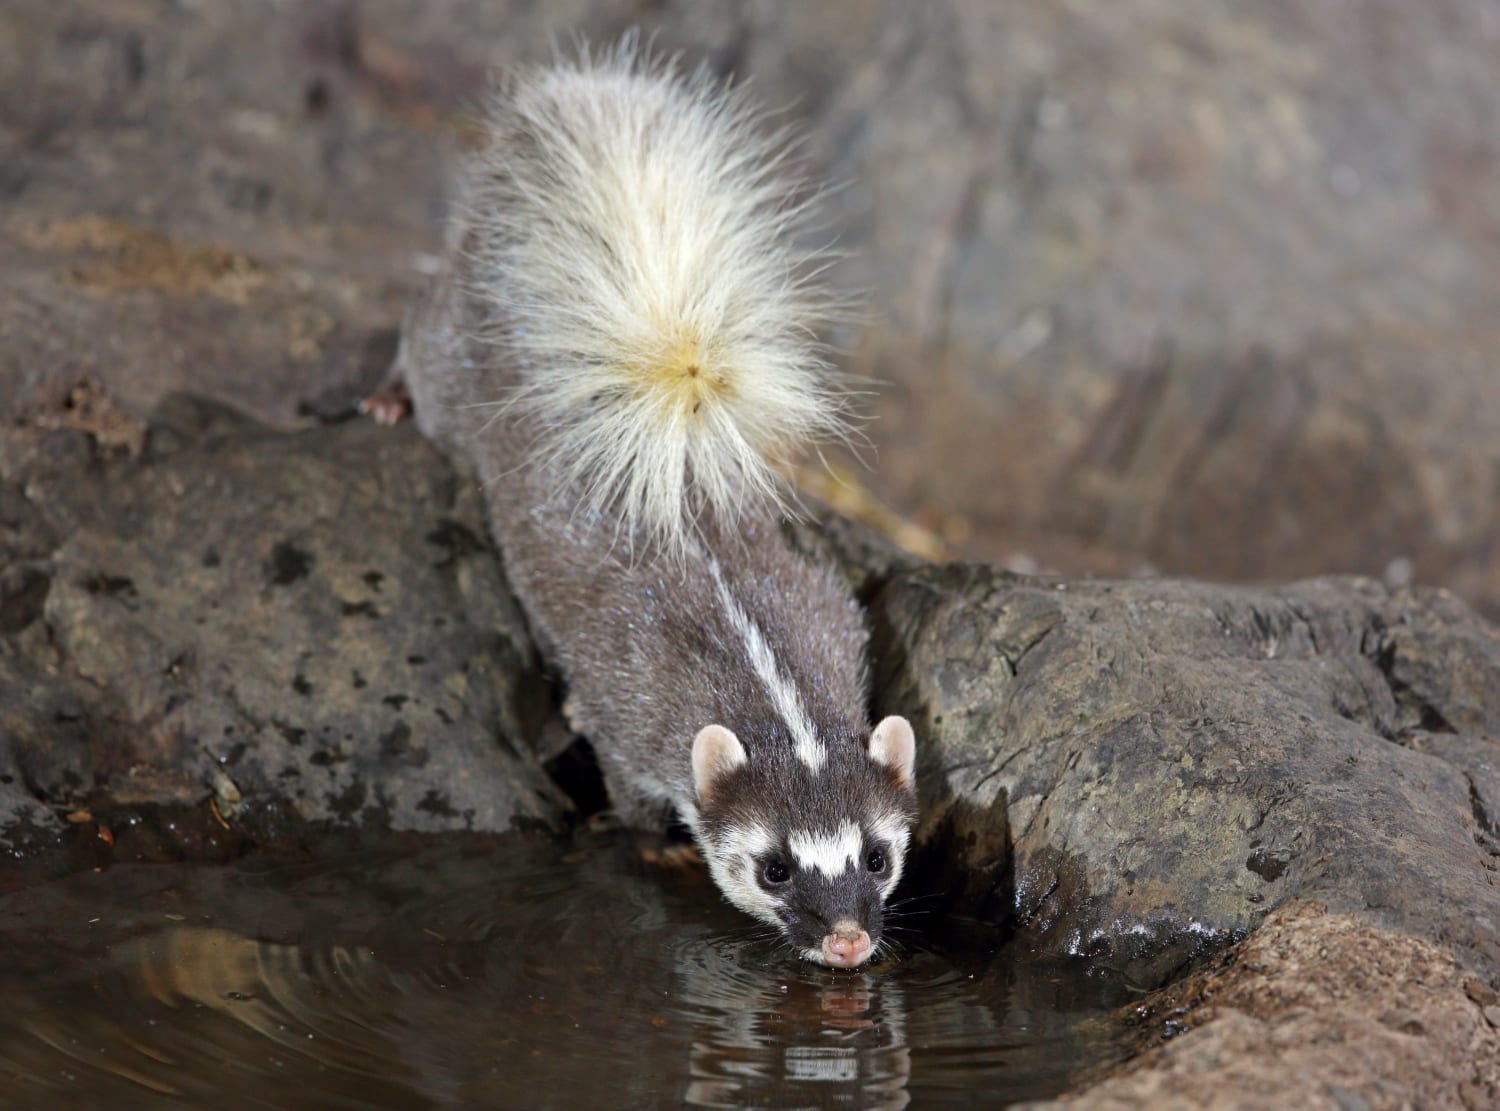 Ferret-badgers are Asian mustelids that have six identified species: Bornean, Chinese, Formosan, Javan, Burmese and Vietnam. The Burmese ferret-badger, native to the forests of southeast Asia, is seen here drinking rainwater from a puddle.